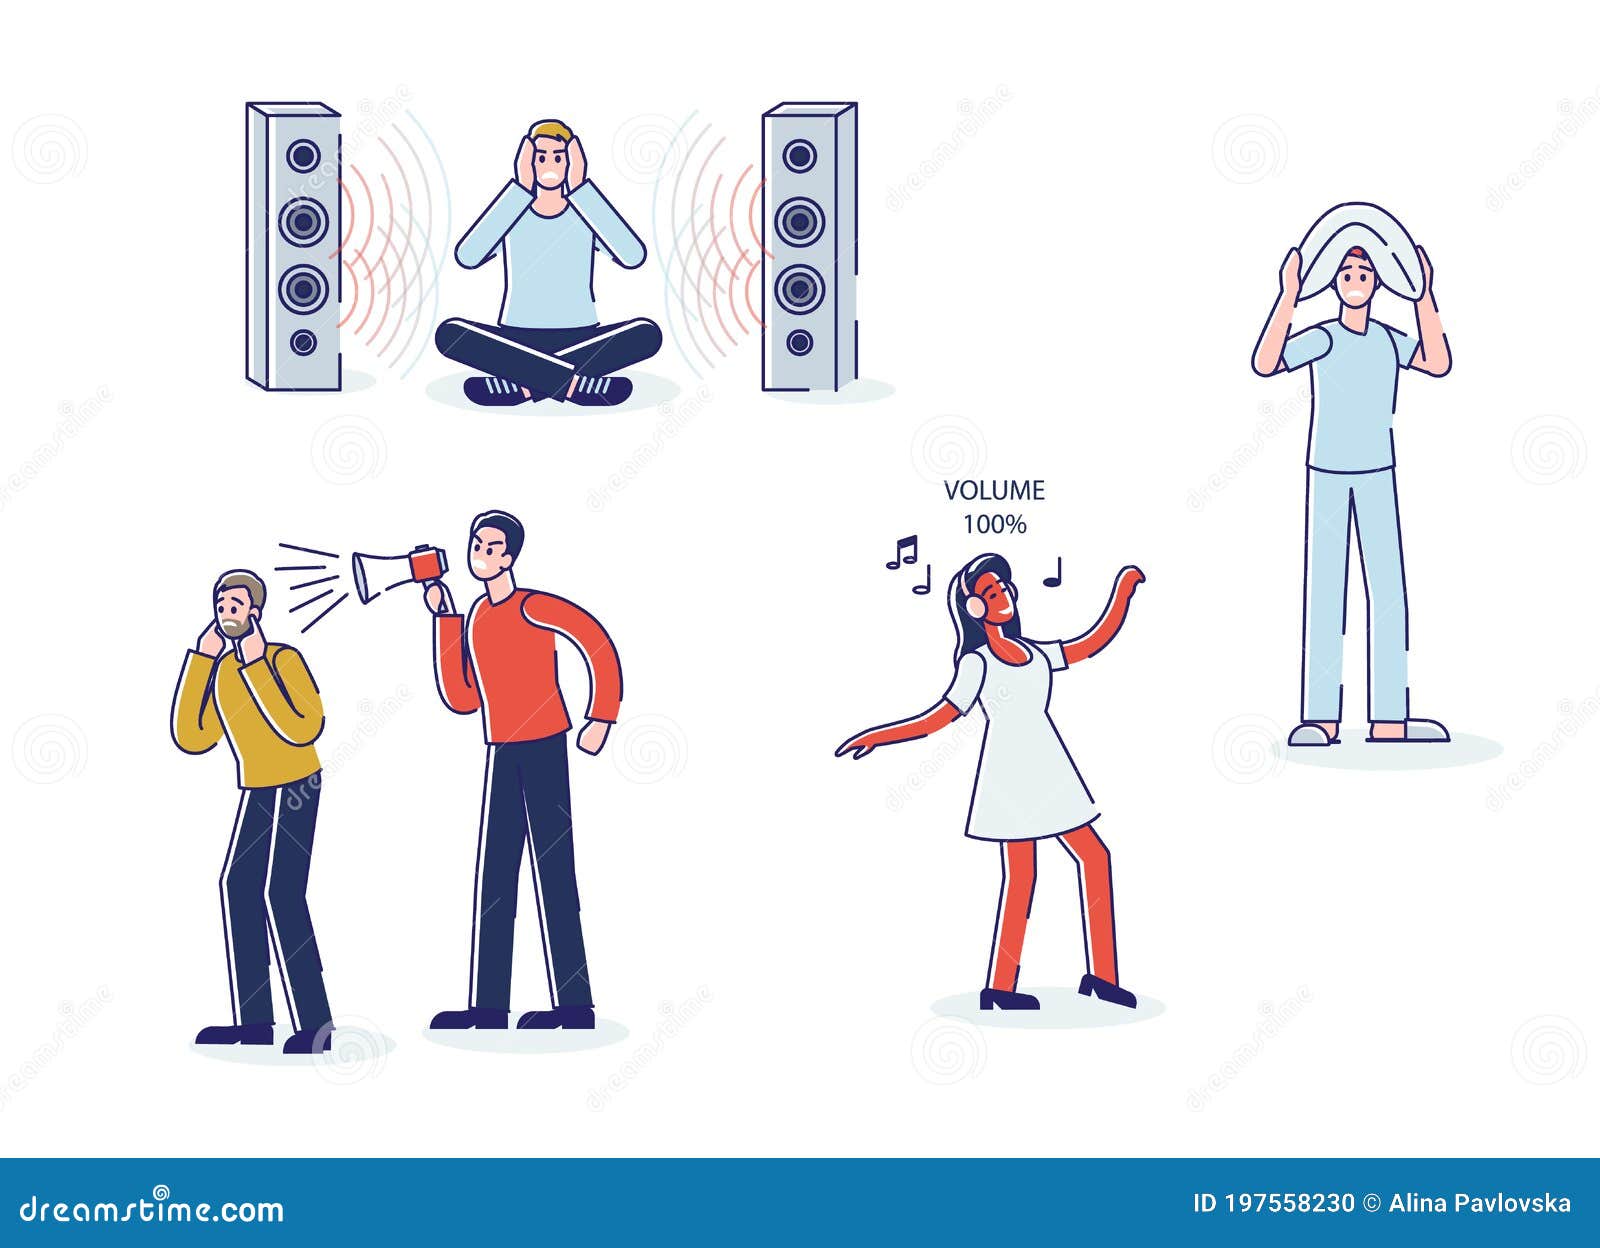 Set of People Tired of Loud Music and High Volume Sound from Speakers and  Megaphone Stock Vector - Illustration of people, music: 197558230